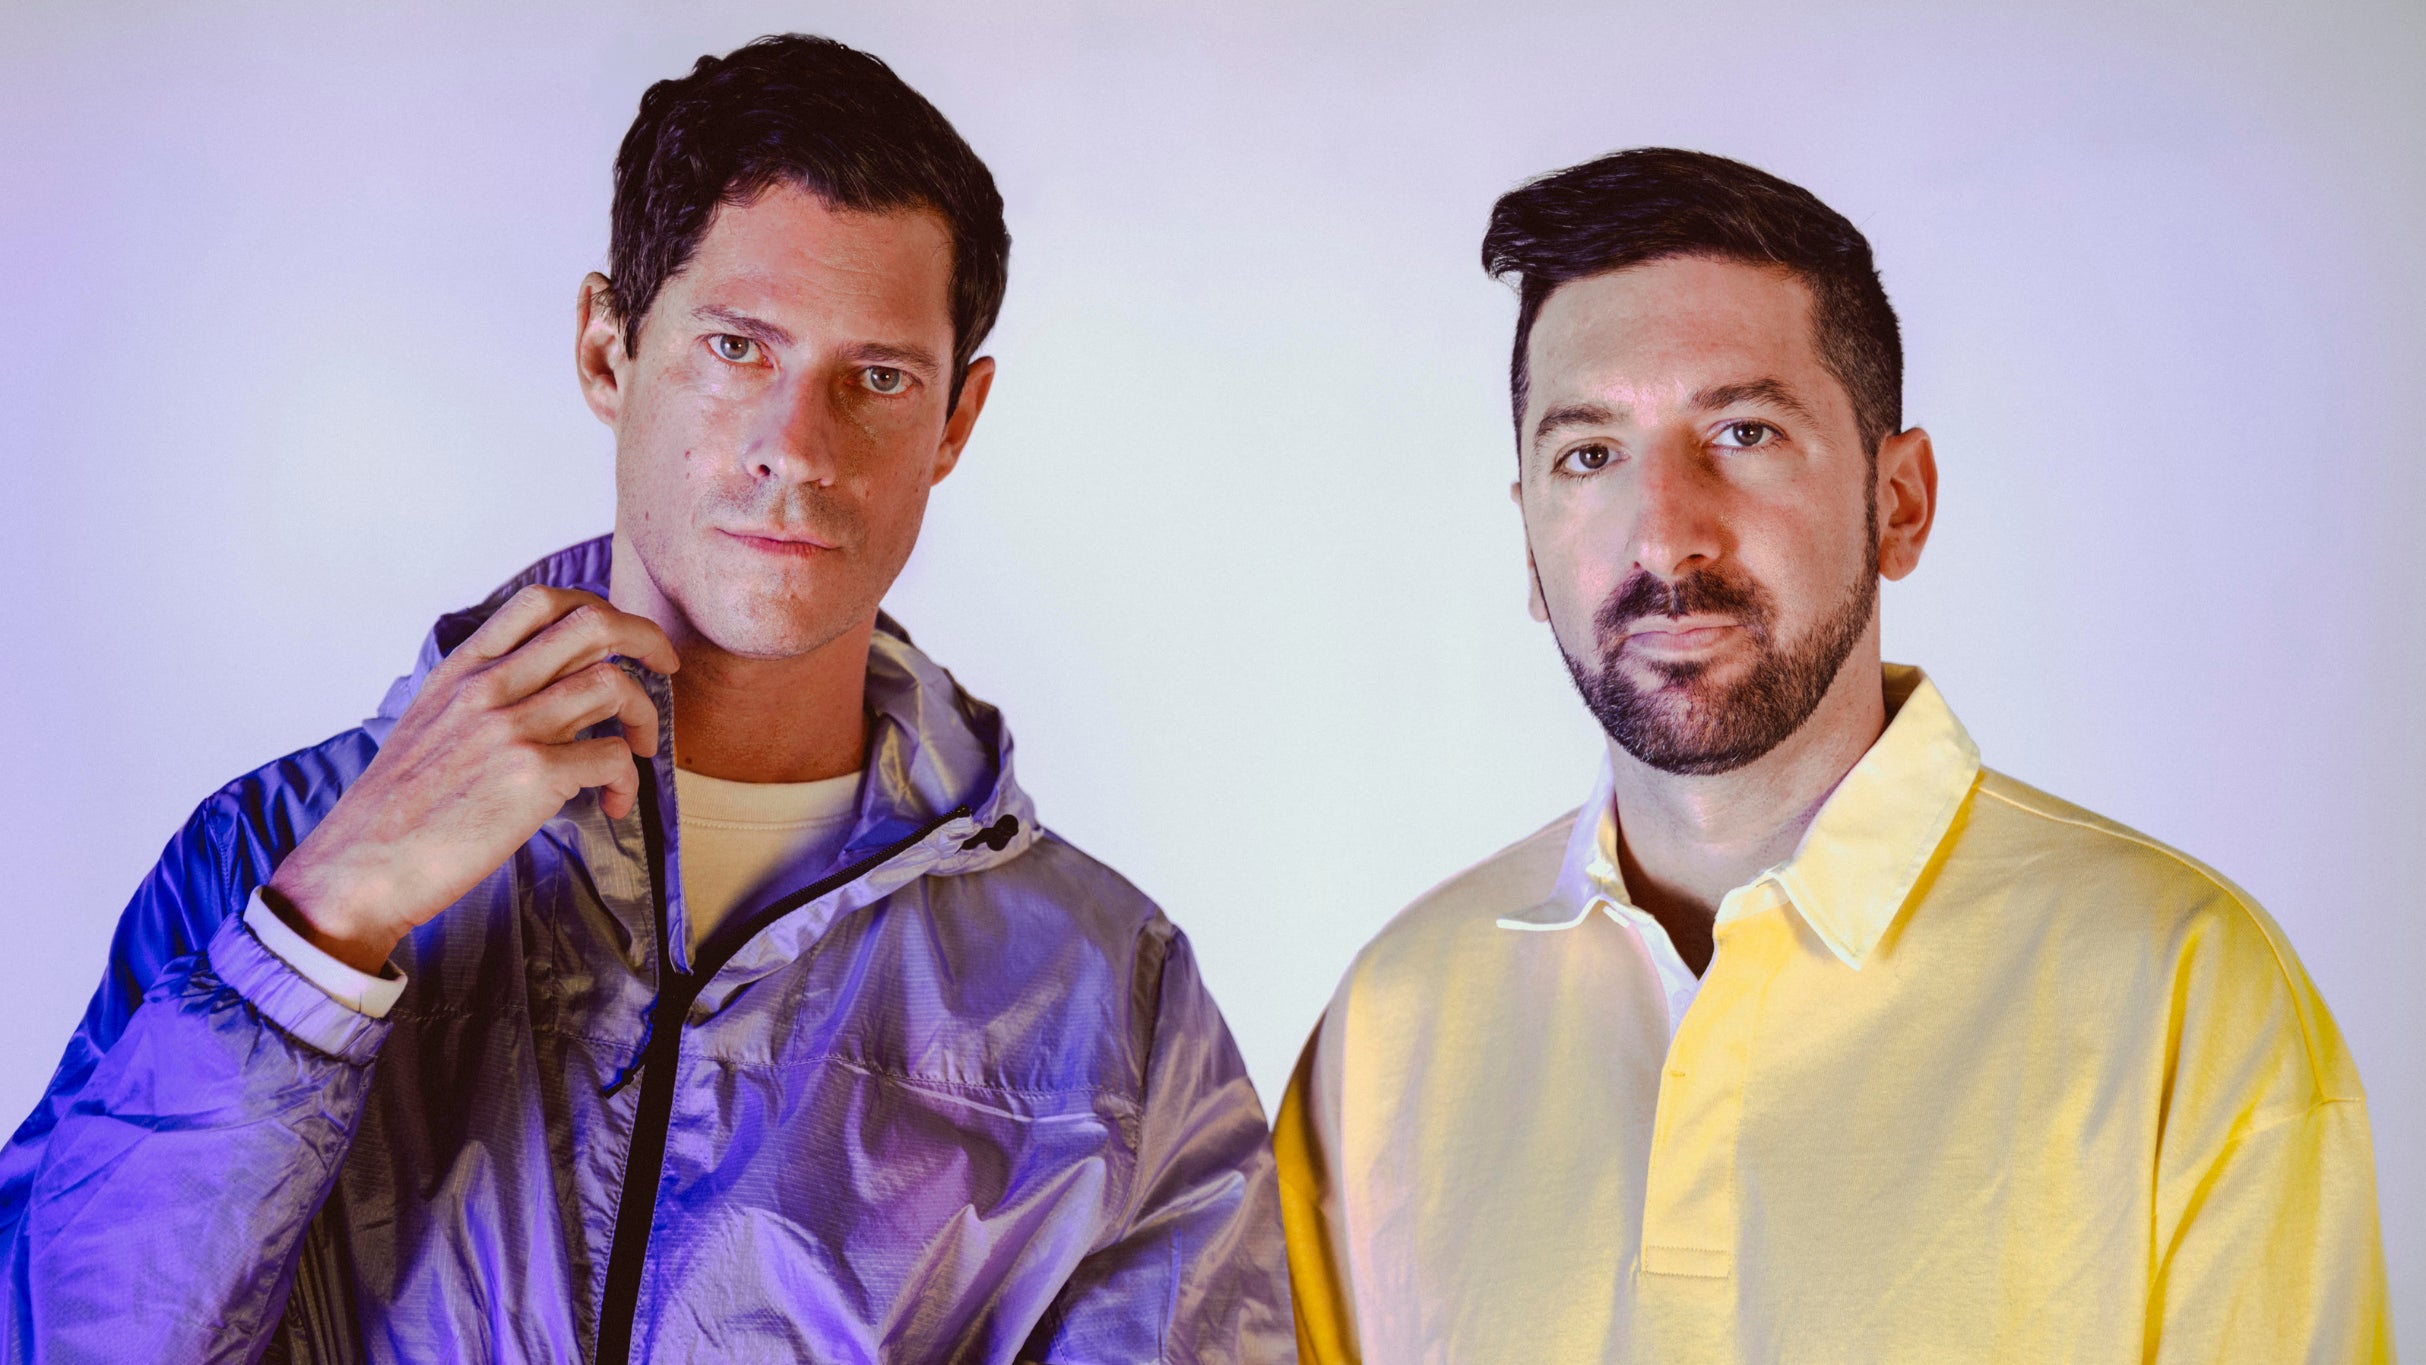 Big Gigantic Brighter Future Tour presale code for early tickets in Washington